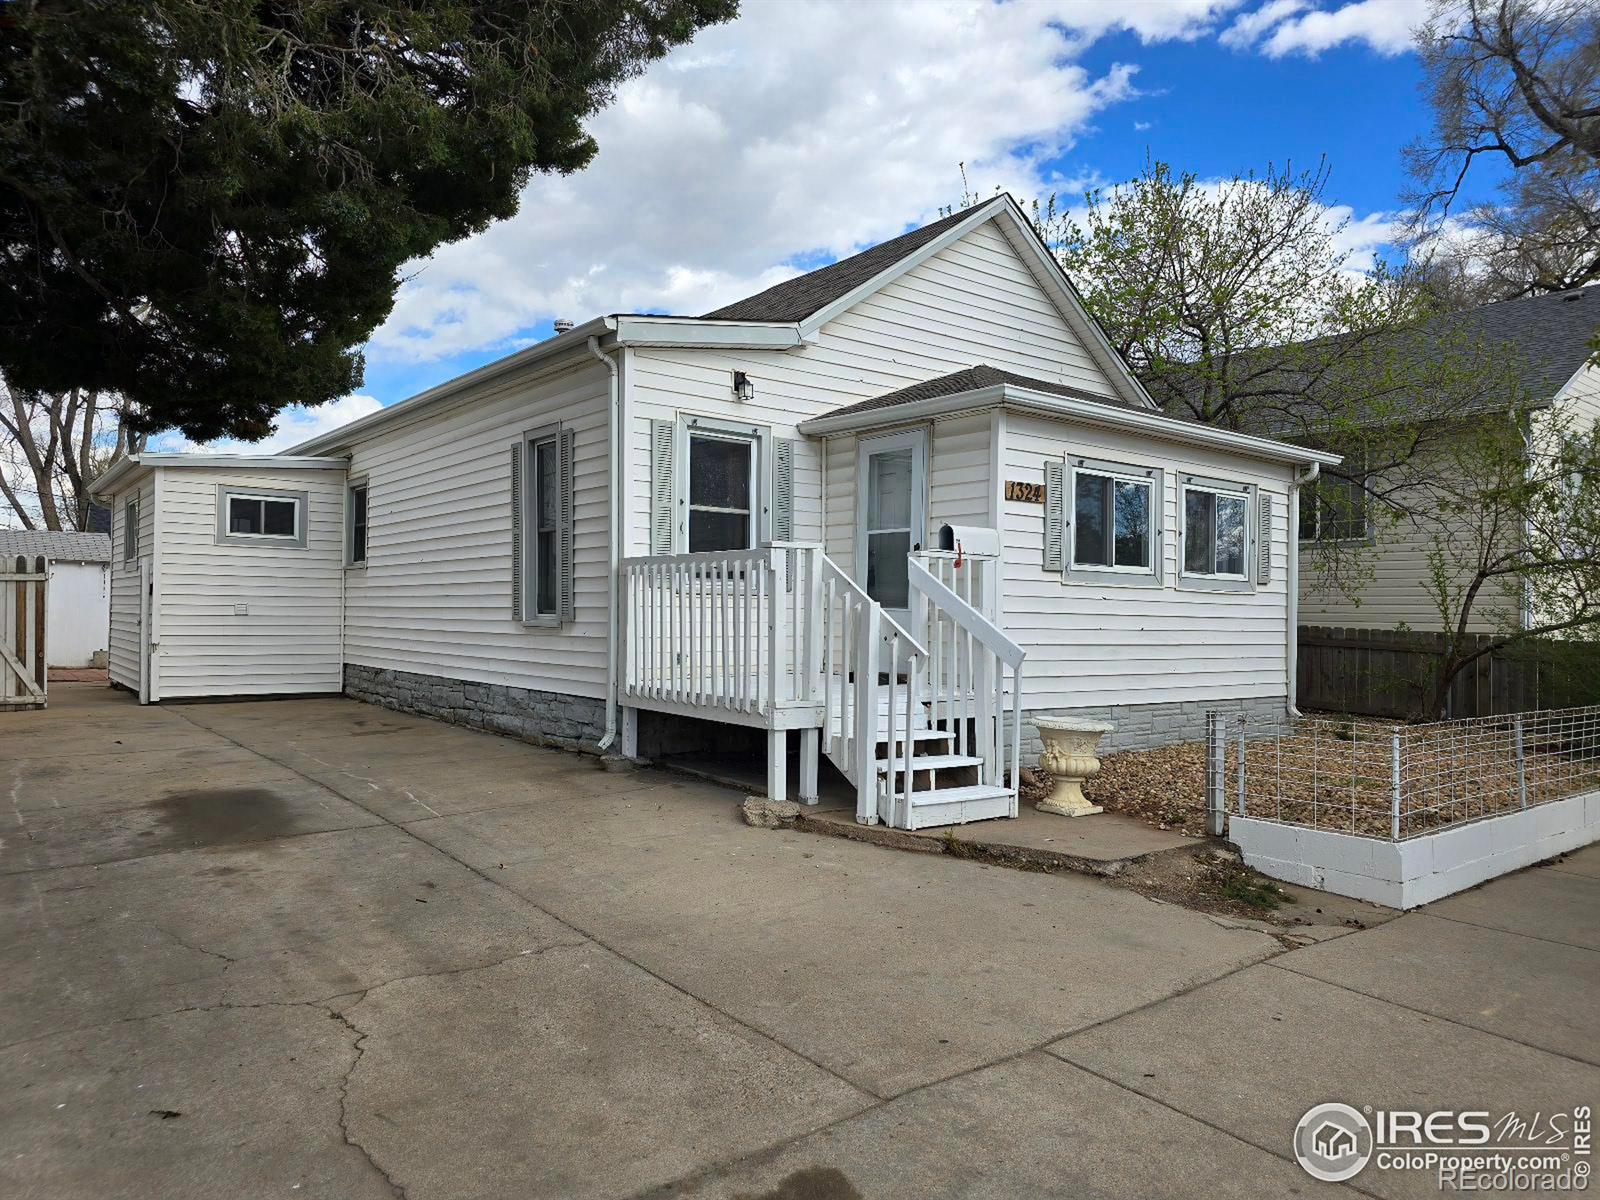 1324  7th Avenue, greeley MLS: 4567891007880 Beds: 3 Baths: 1 Price: $299,000